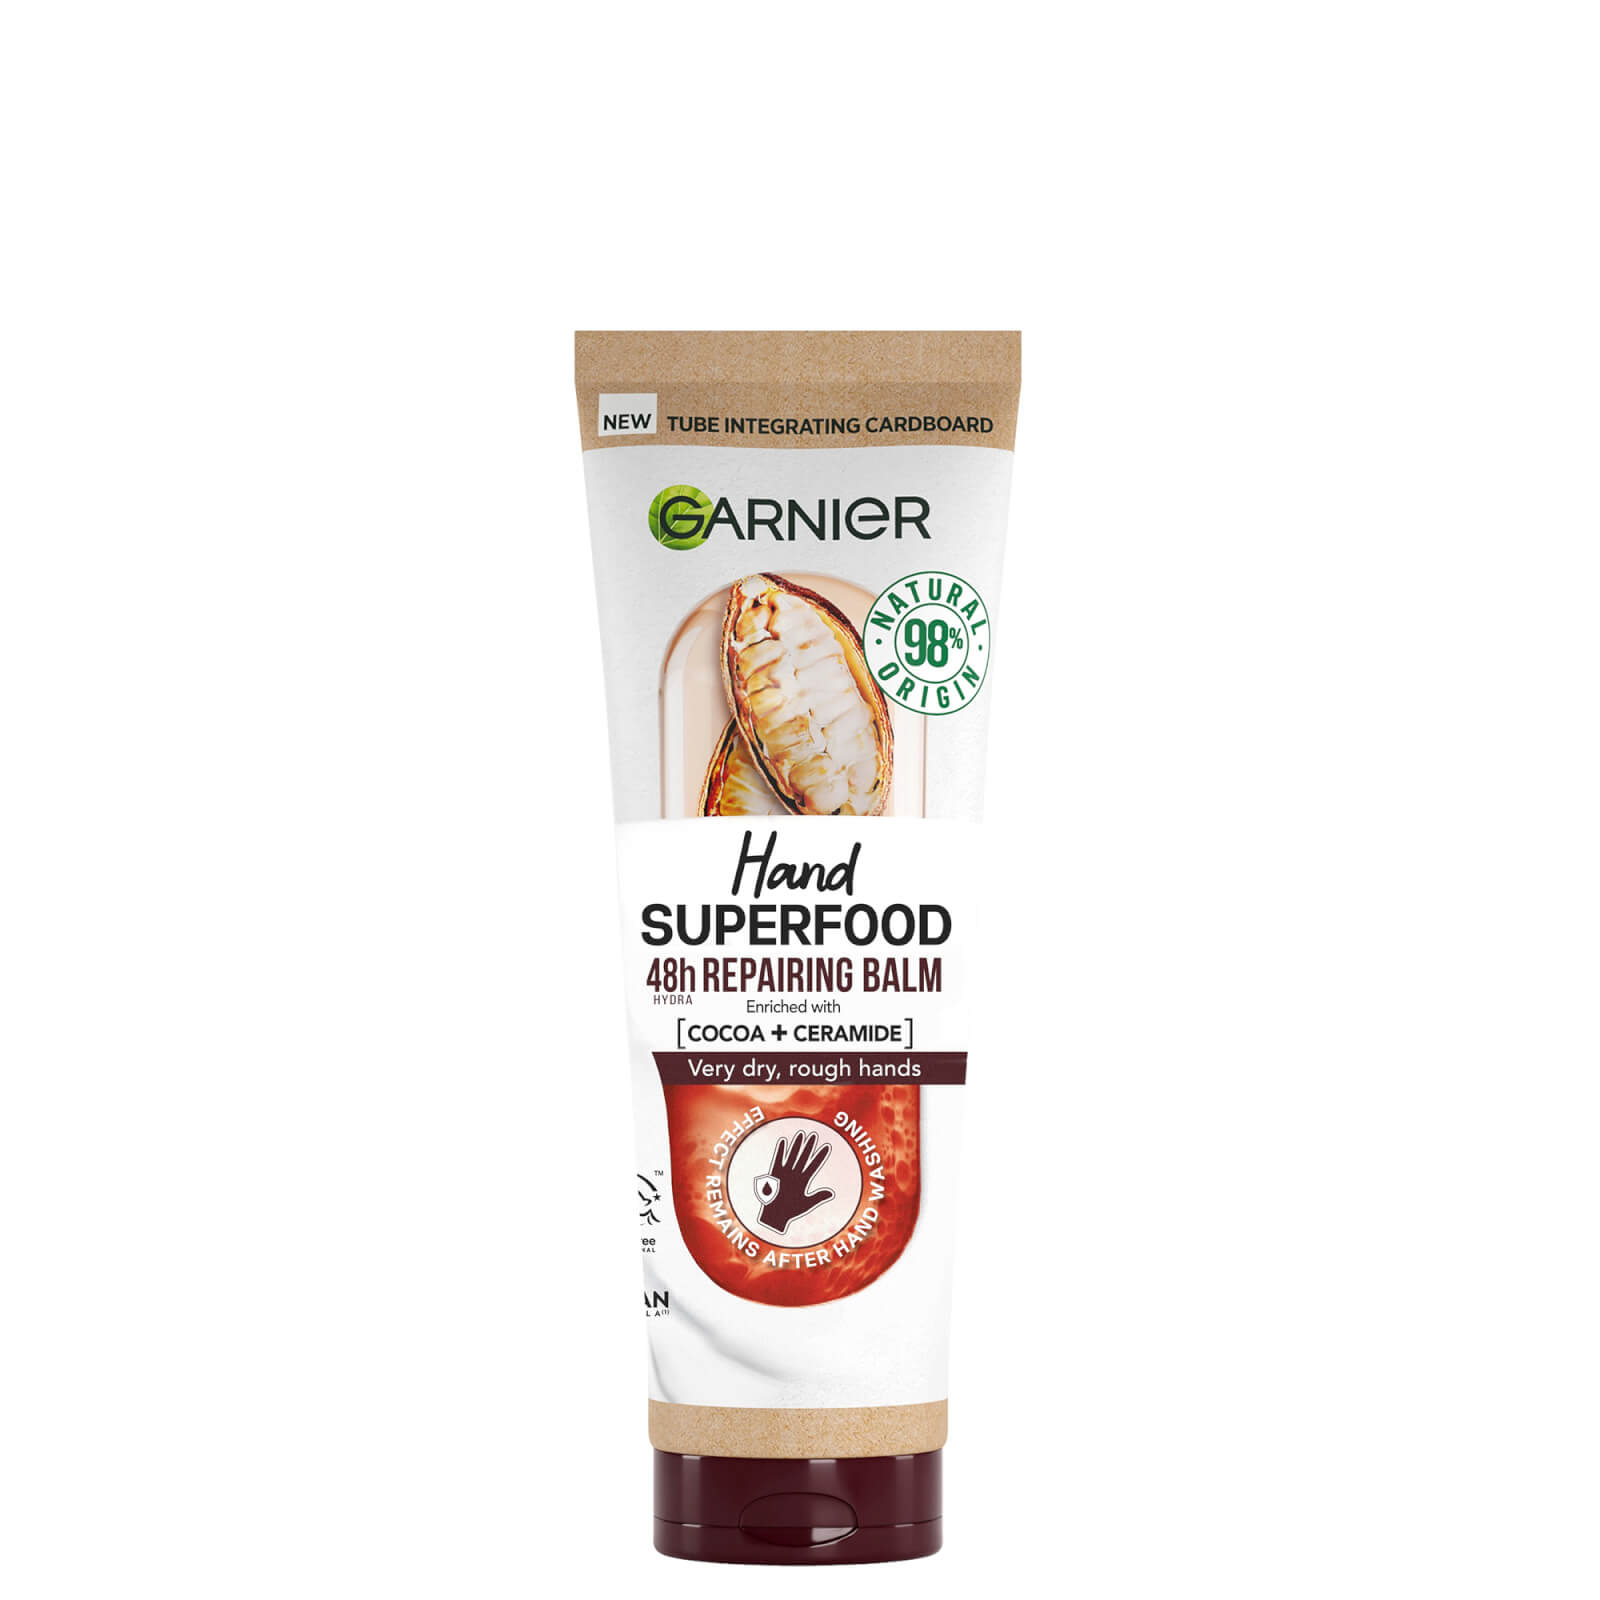 Garnier New  Hand Superfood, Repairing Hand Cream, With Cocoa And Ceramide, Hand Cream For Very Dry,  In White